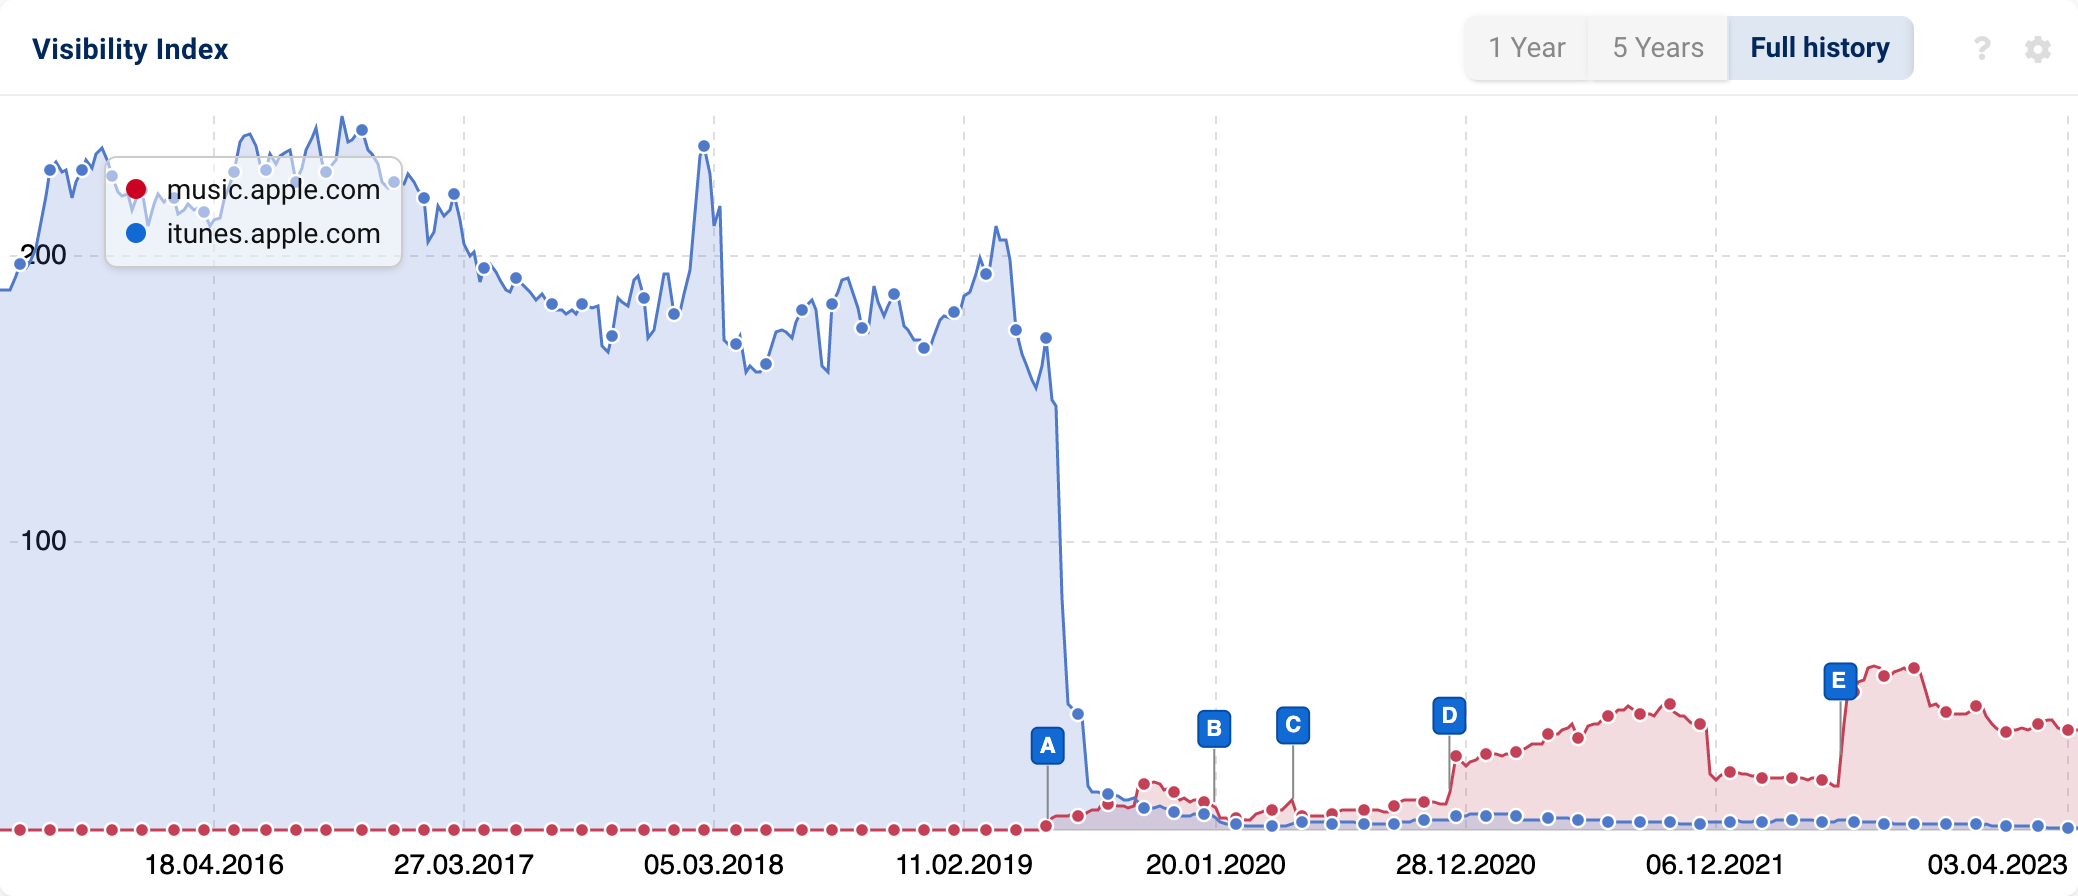 The hostname history for desktop data for the hosts music and itunes on apple.com. Since 2015, the itunes host has continously lost visibility. At the beginning of 2020, there was a switch from itunes to music and initially, there was a visible loss but since then, the music host has been slowly gaining visibility.